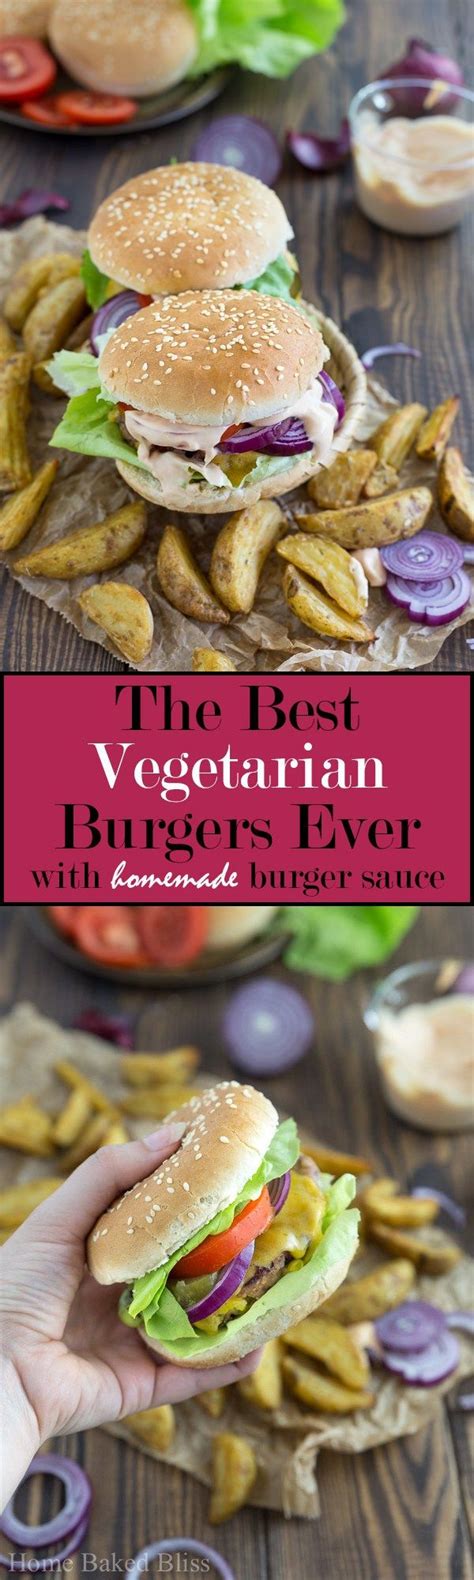 Find healthy, delicious vegetarian recipes including vegetarian breakfasts, lunches and dinners. The Best Vegetarian Burgers Ever | Recipe | Vegetarian ...